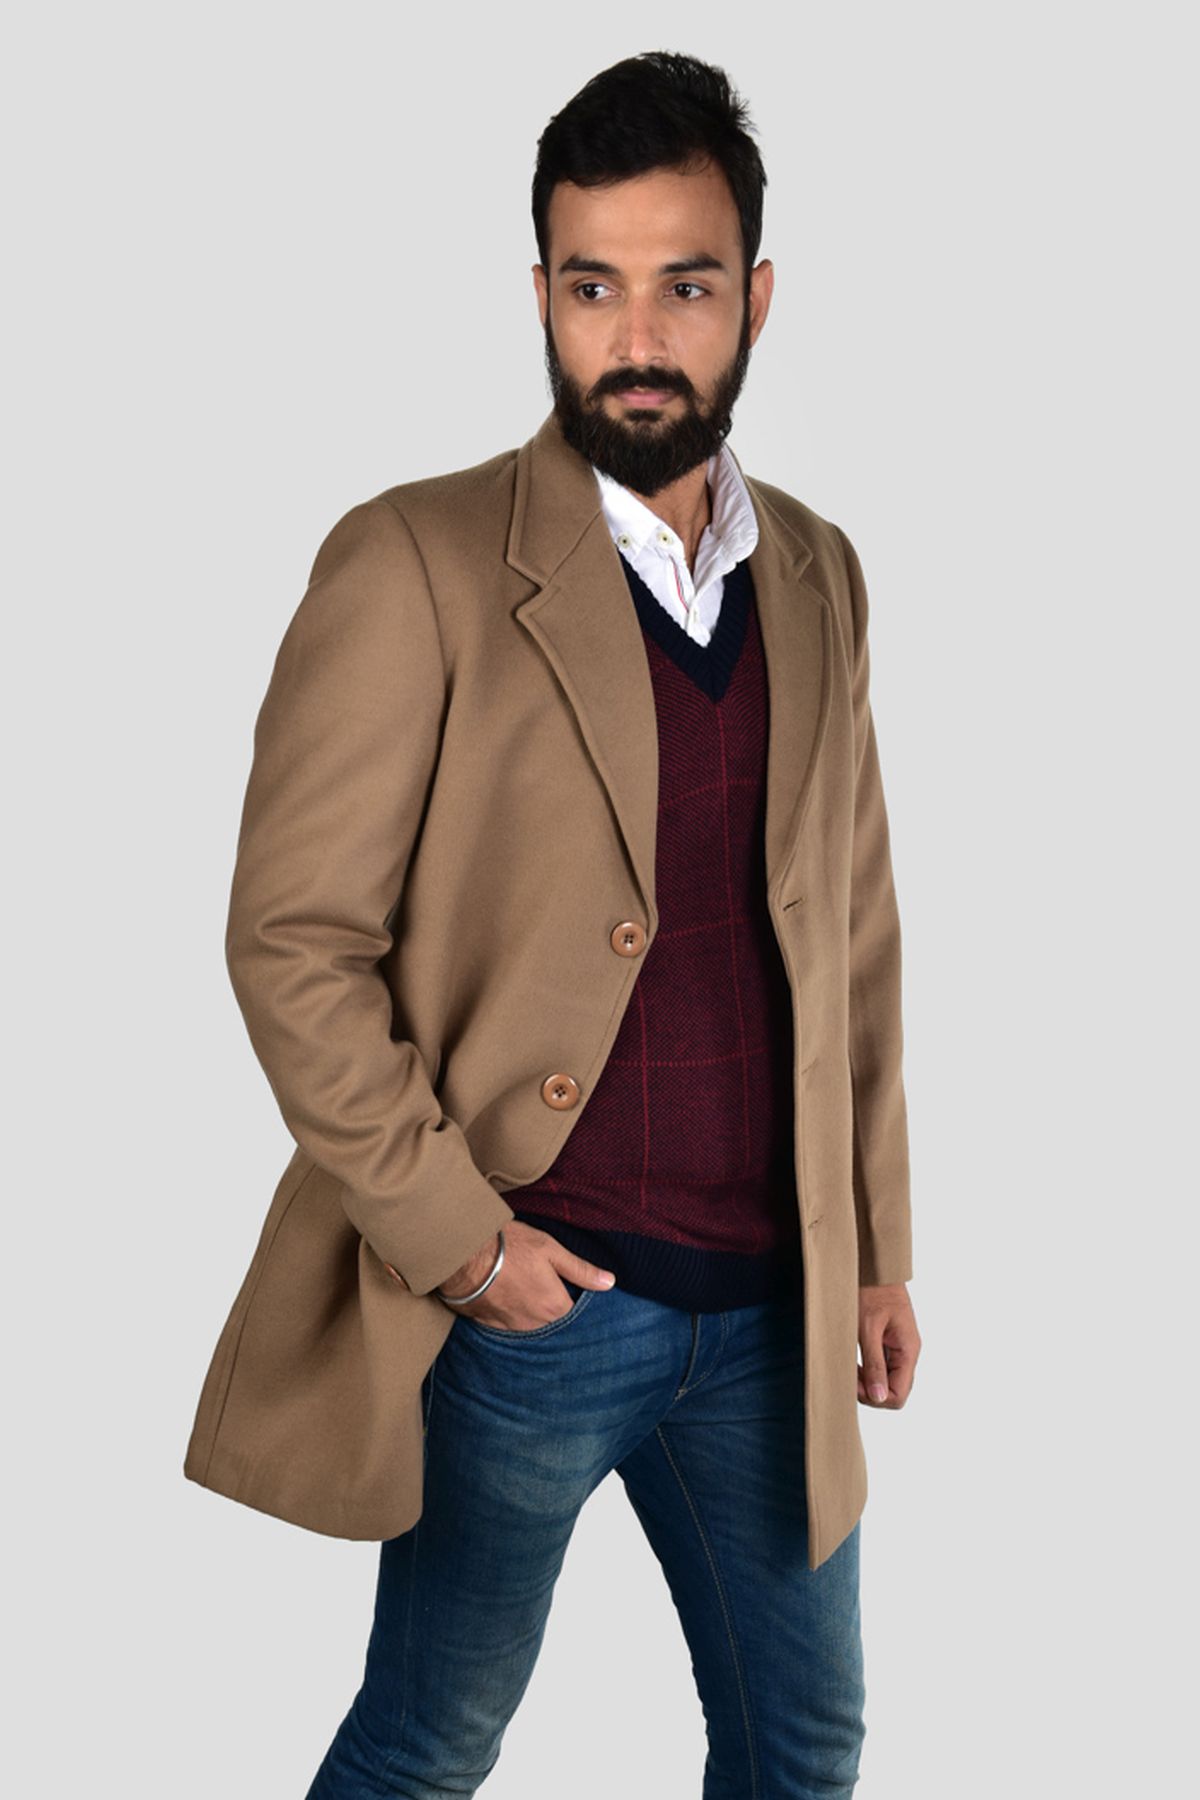 INVACHI Men's Single breasted Mid-length Winter Woolen Business Coat with Free Detachable Soft Touch Wool Scarf 